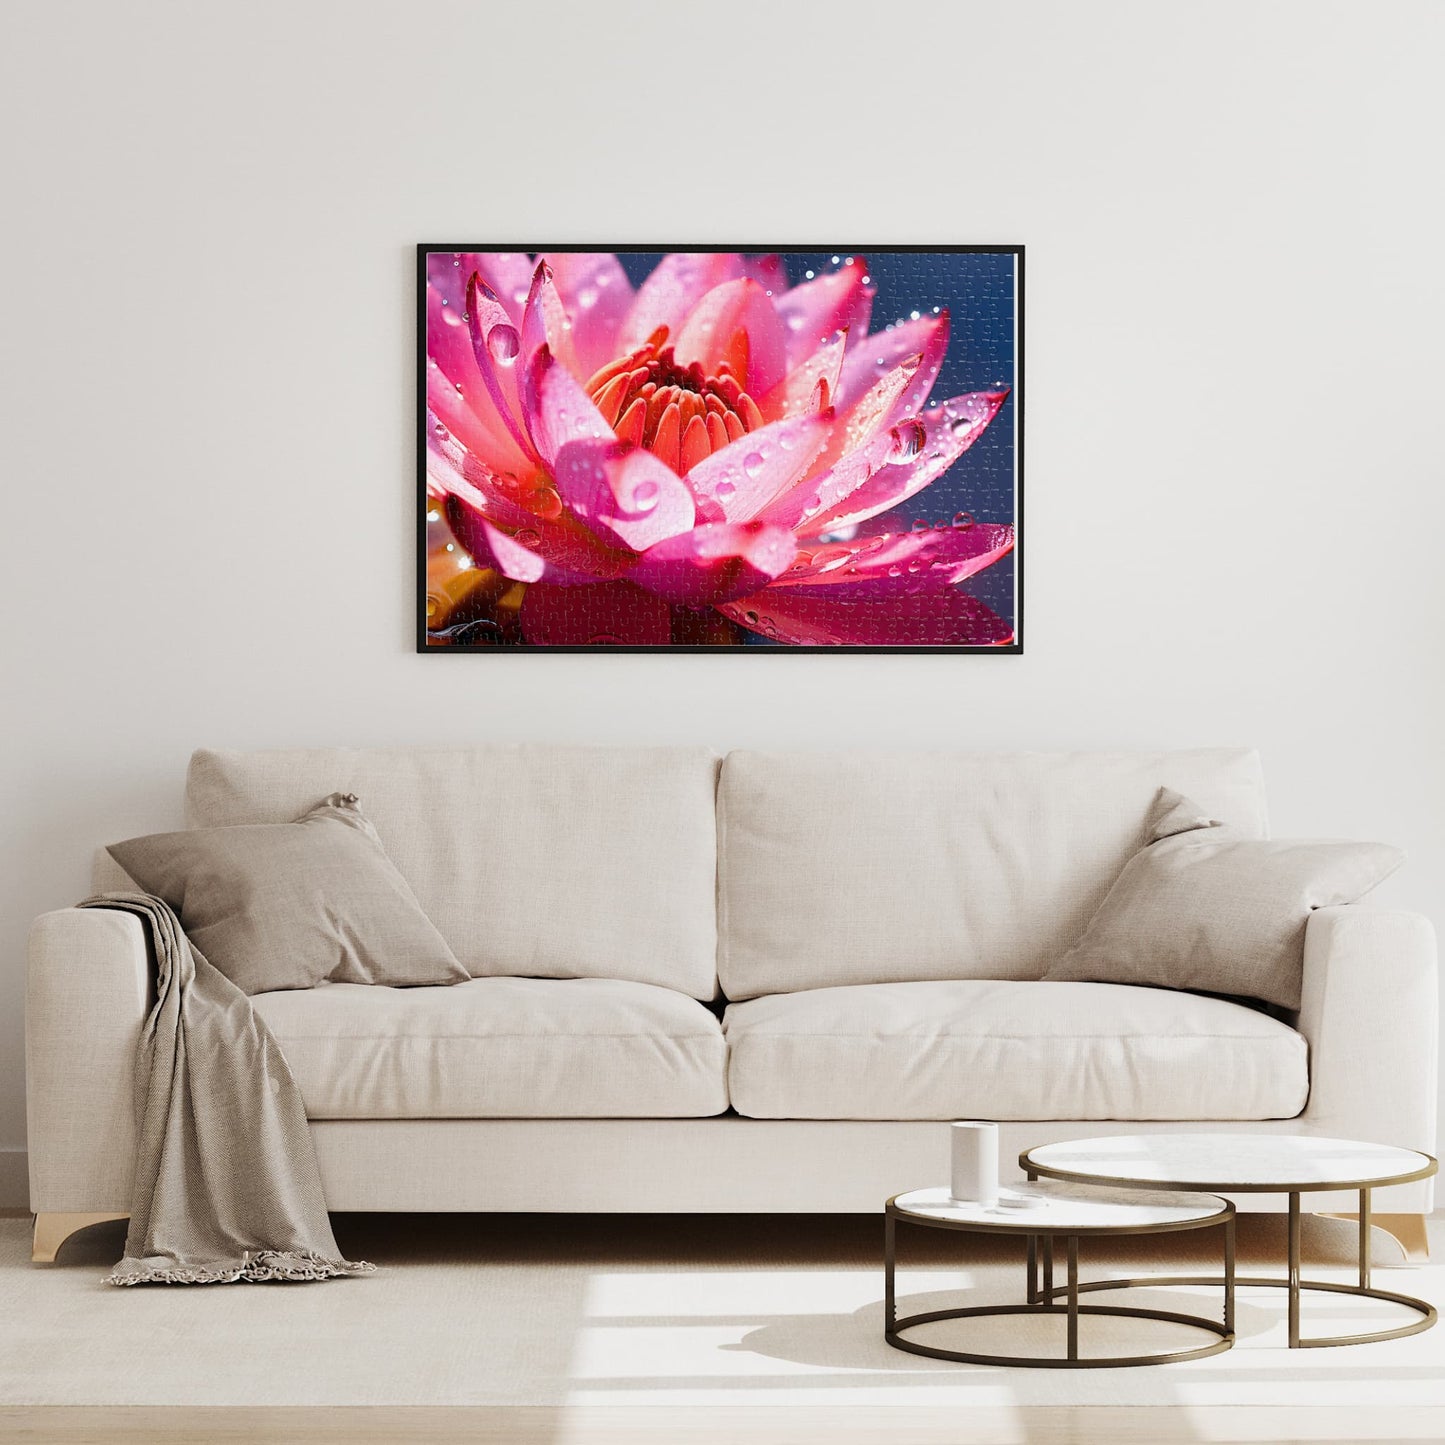 Elegantly framed 1000 piece jigsaw puzzle featuring a stunning pink lotus flower with water drops, acting as a vibrant living room wall decor piece.